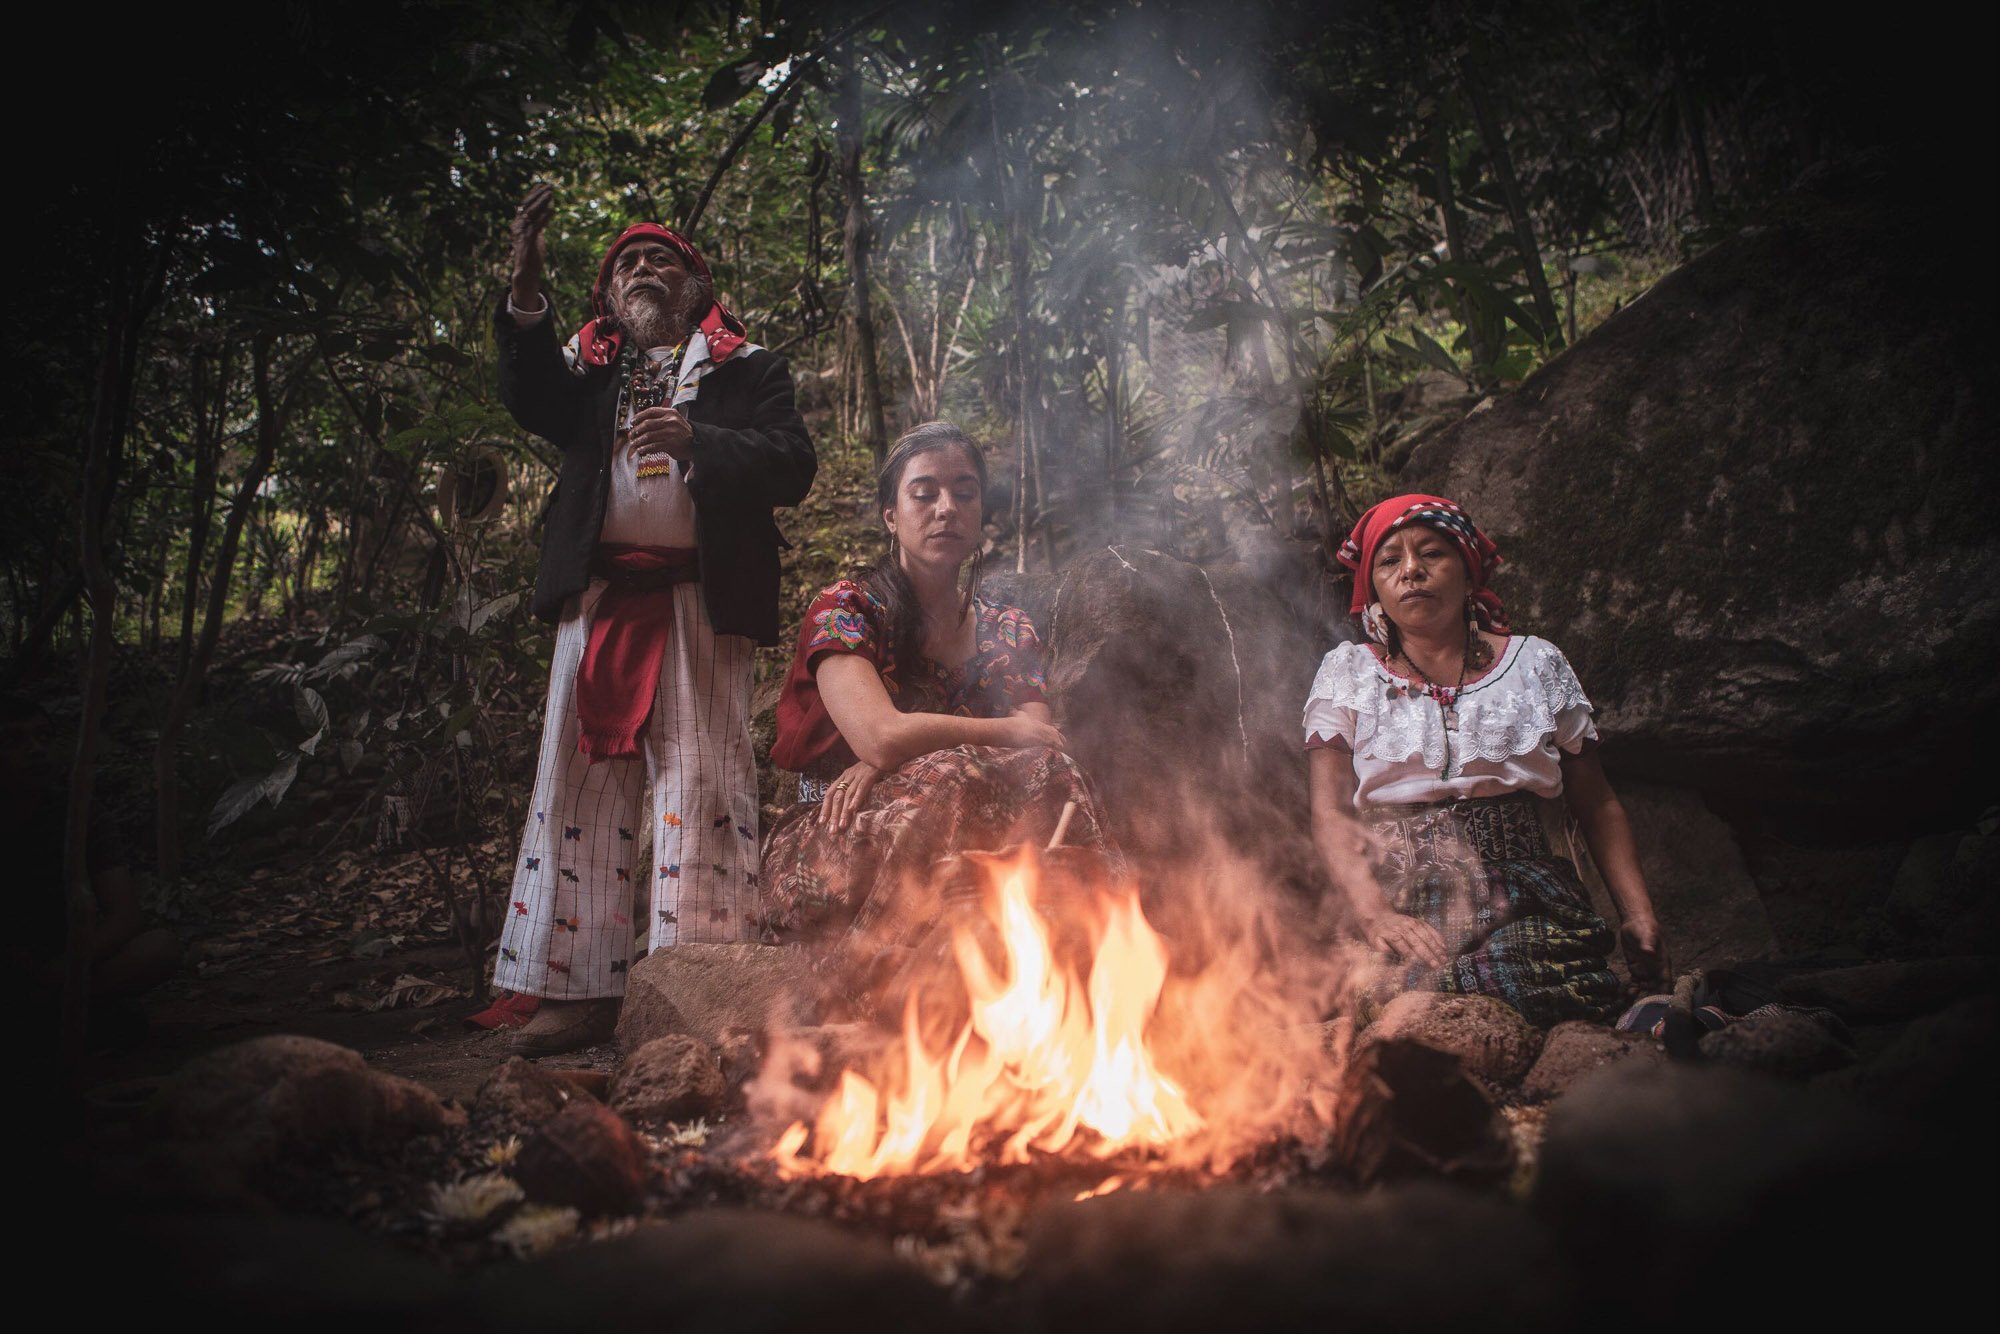 Man and women around a sacred fire